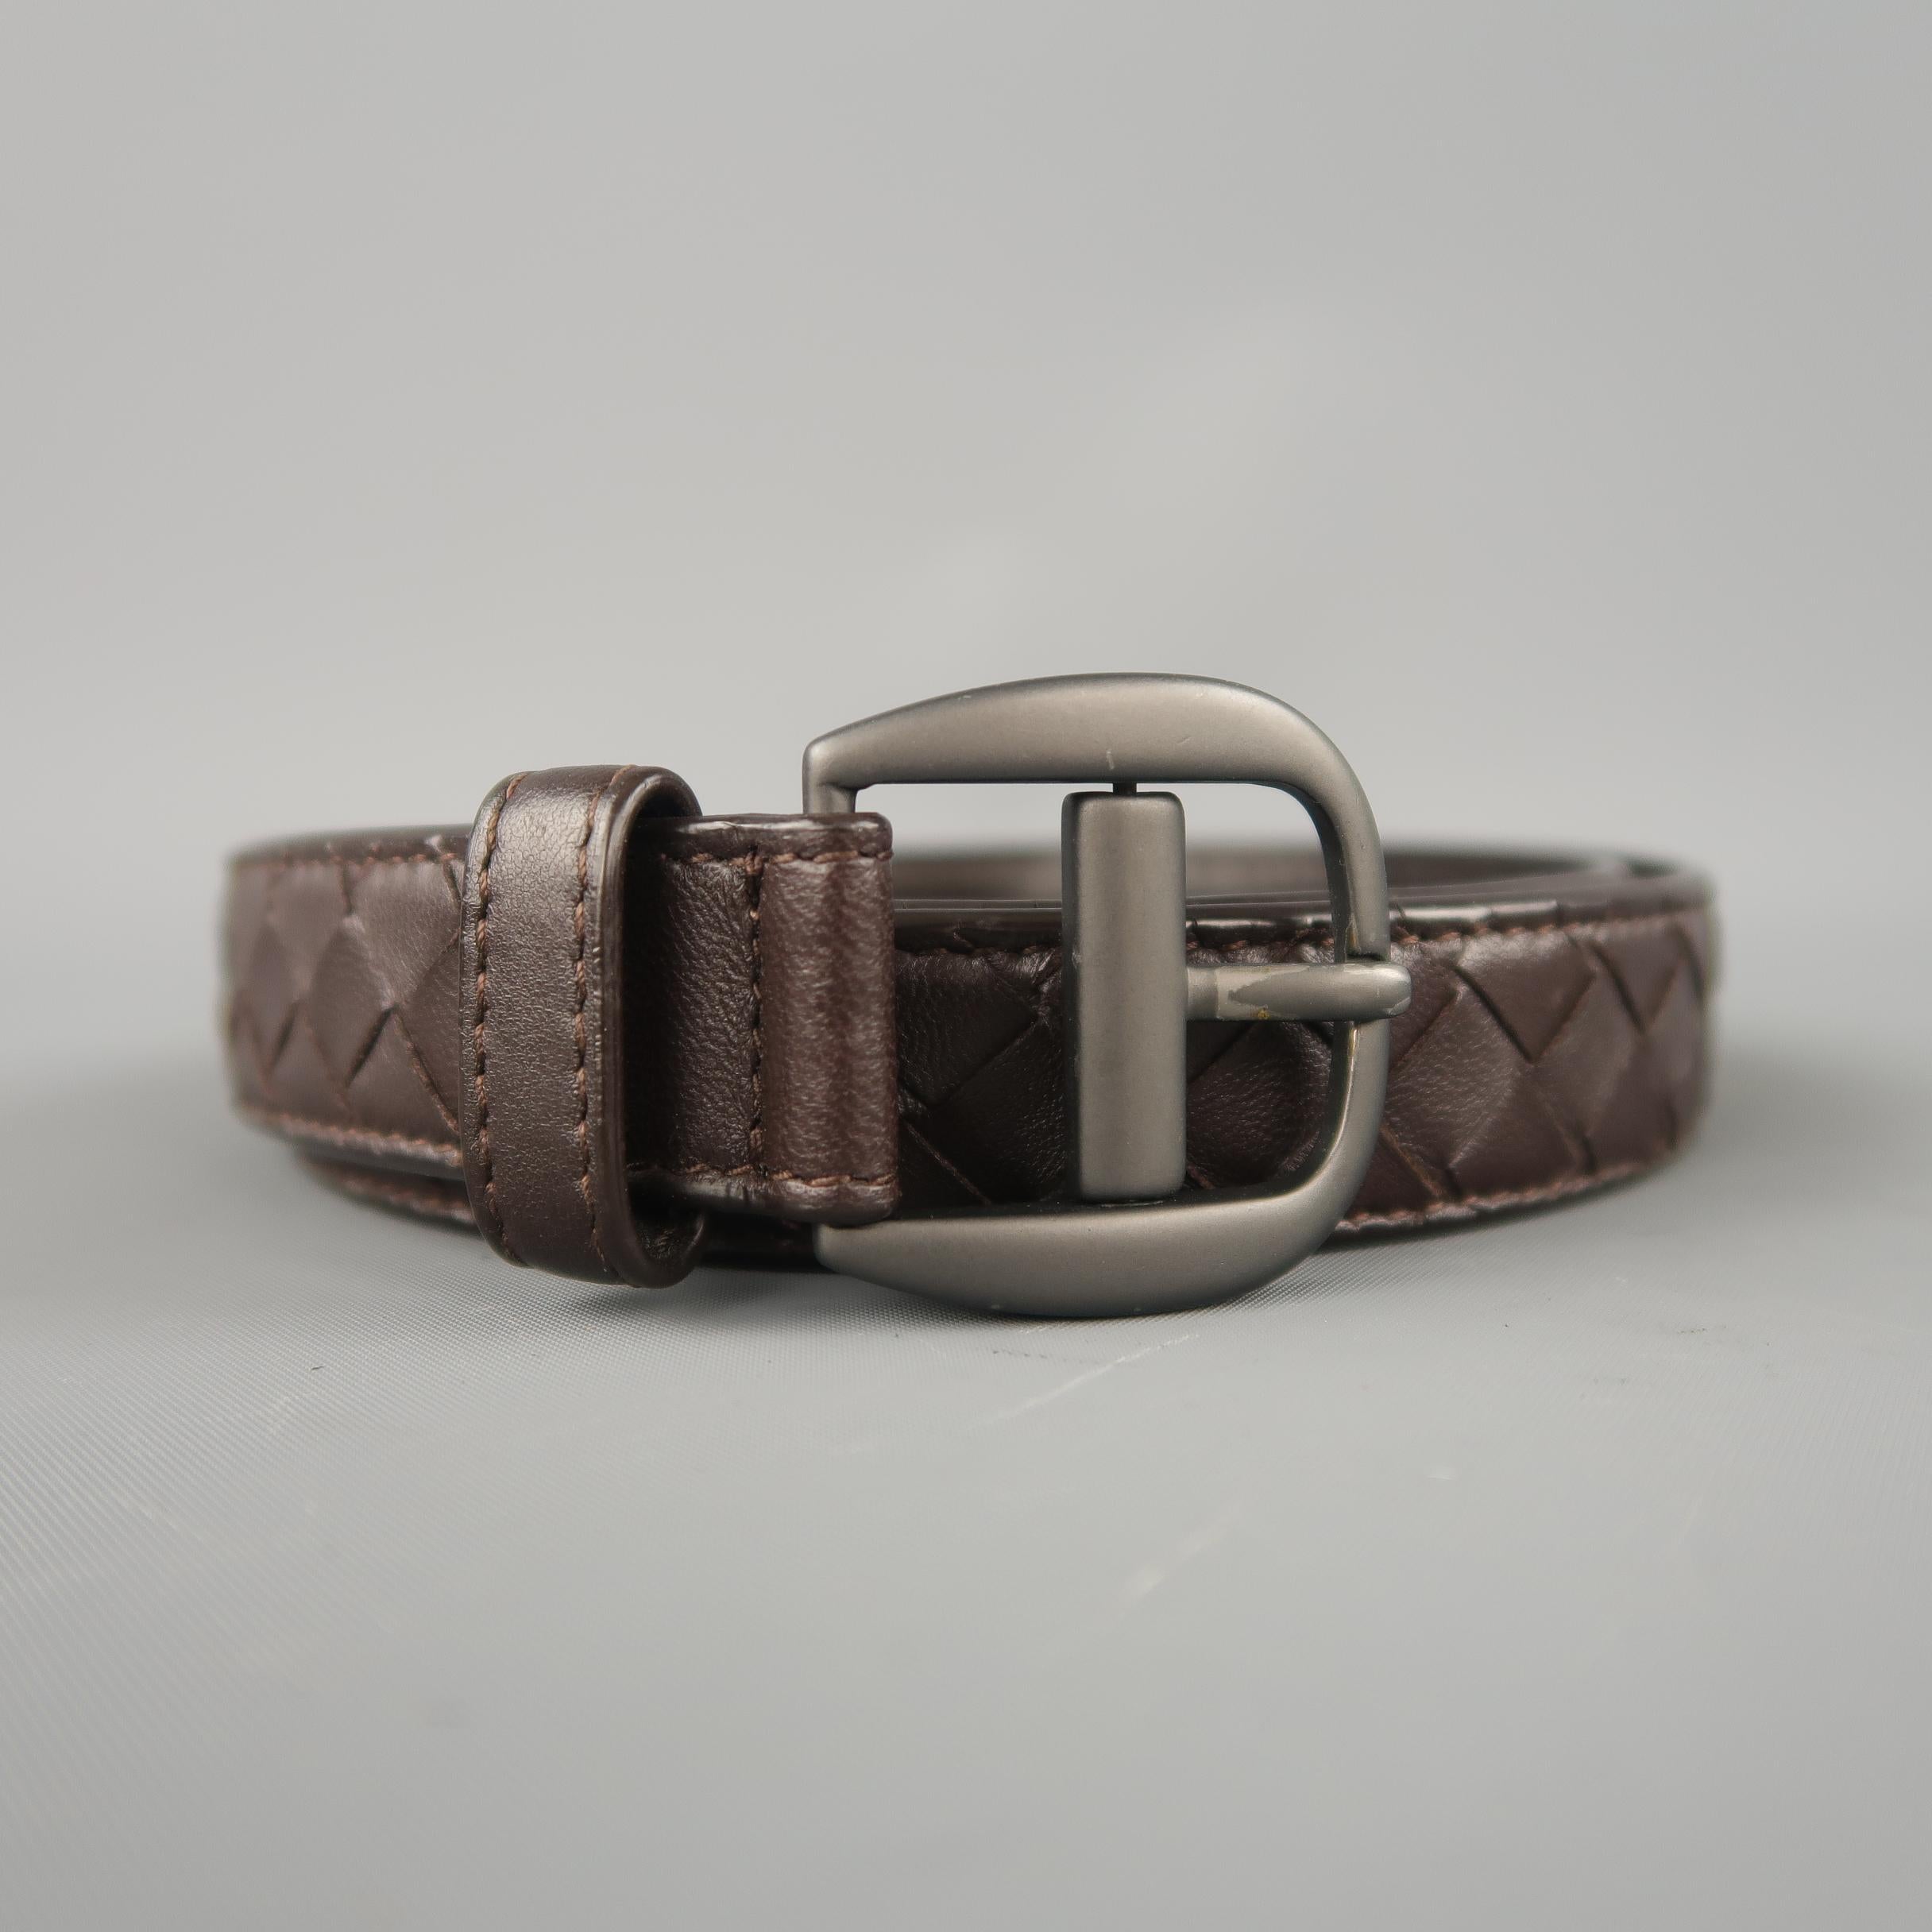 BOTTEGA VENETA skinny belt features a chocolate brown woven Intrecciato leather strap with a dark silver tone buckle. Made in Italy.
 
Excellent Pre-Owned Condition.
Marked: 85 cm 34 in
 
Length: 39.5 in.
Width: 0.95 in.
Fits: 30.5-35.5 in.